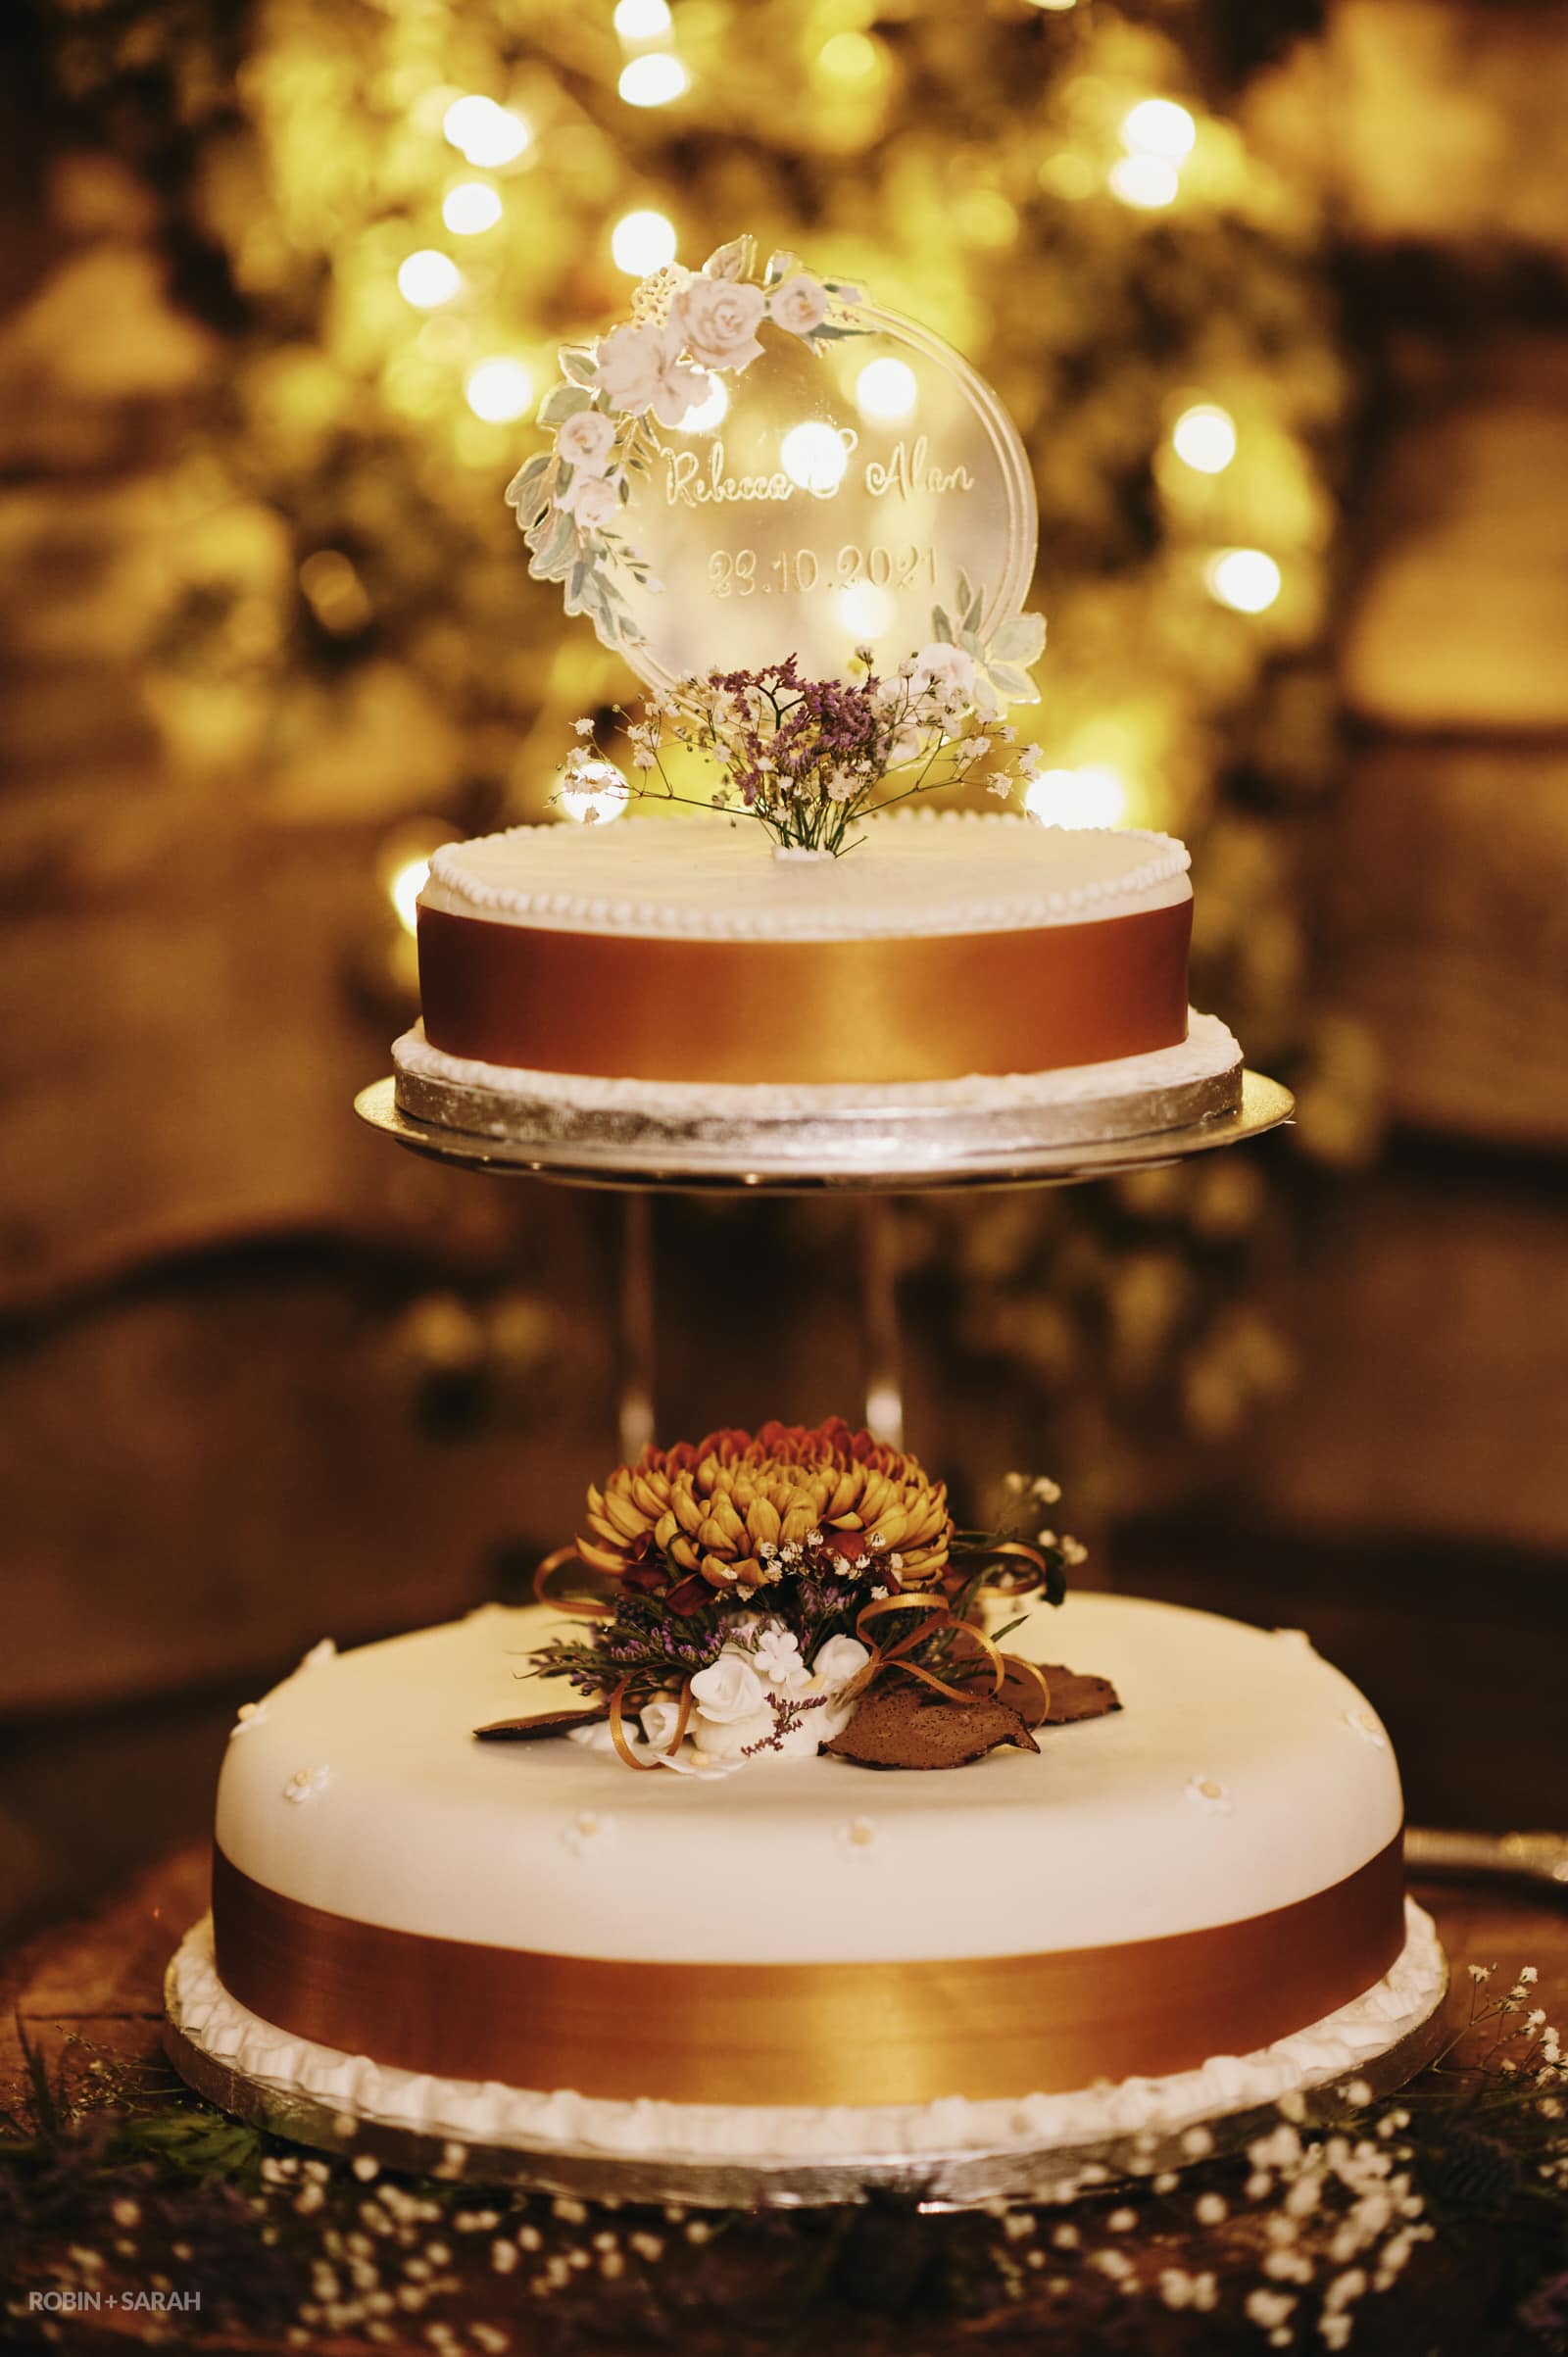 Wedding cake with white icing and copper coloured banding